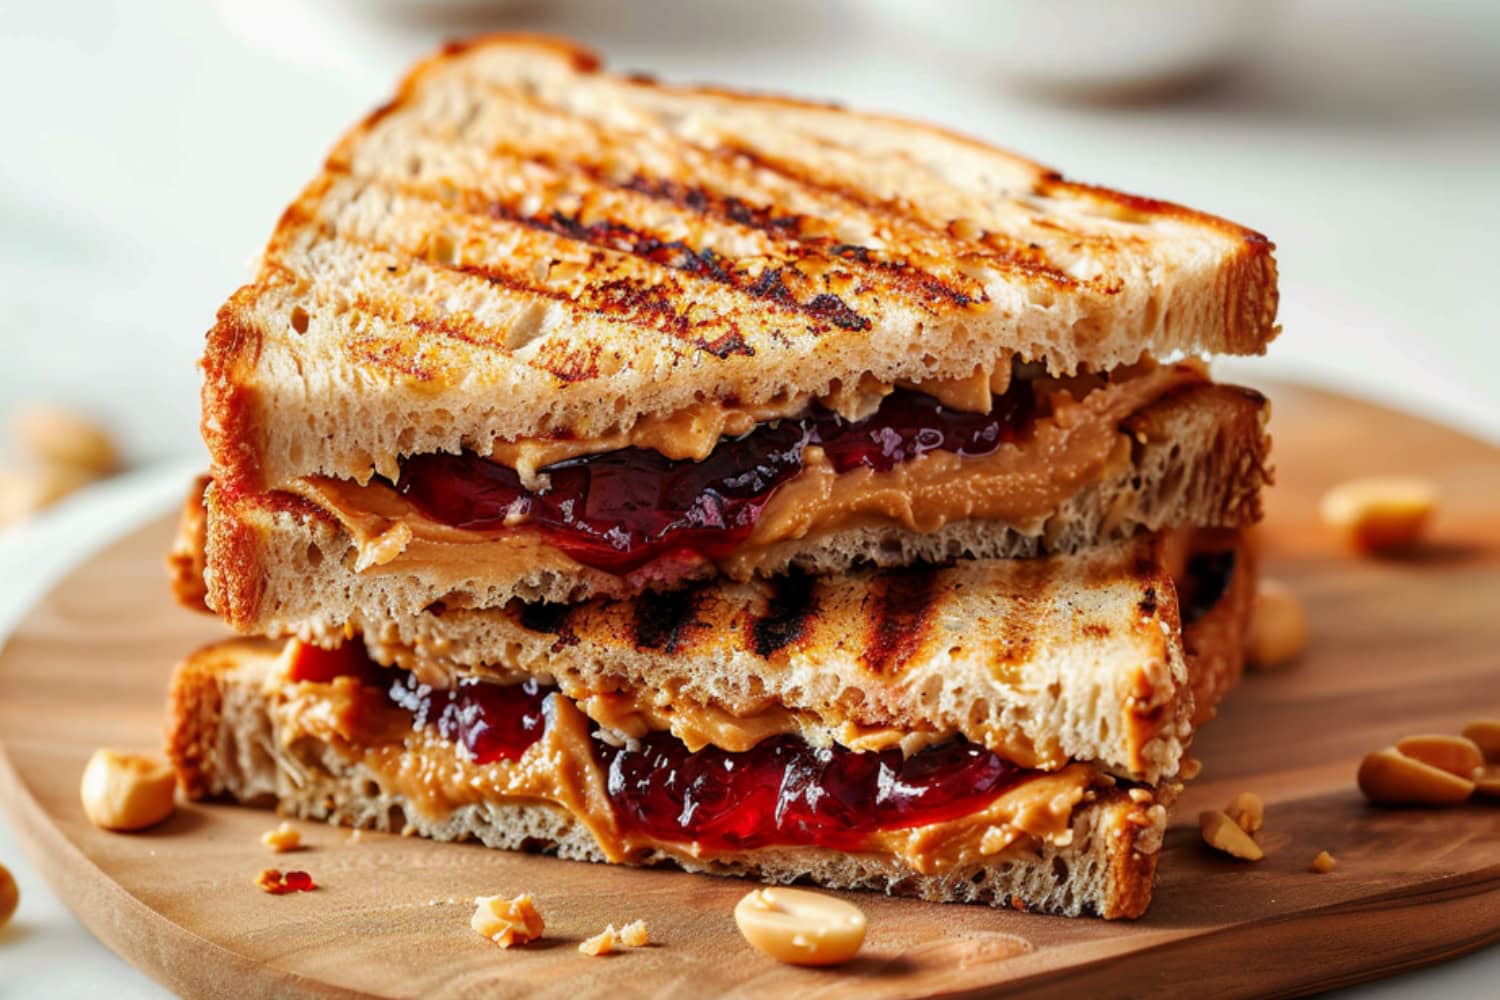 Stack of grilled peanut butter and jelly sandwiches.